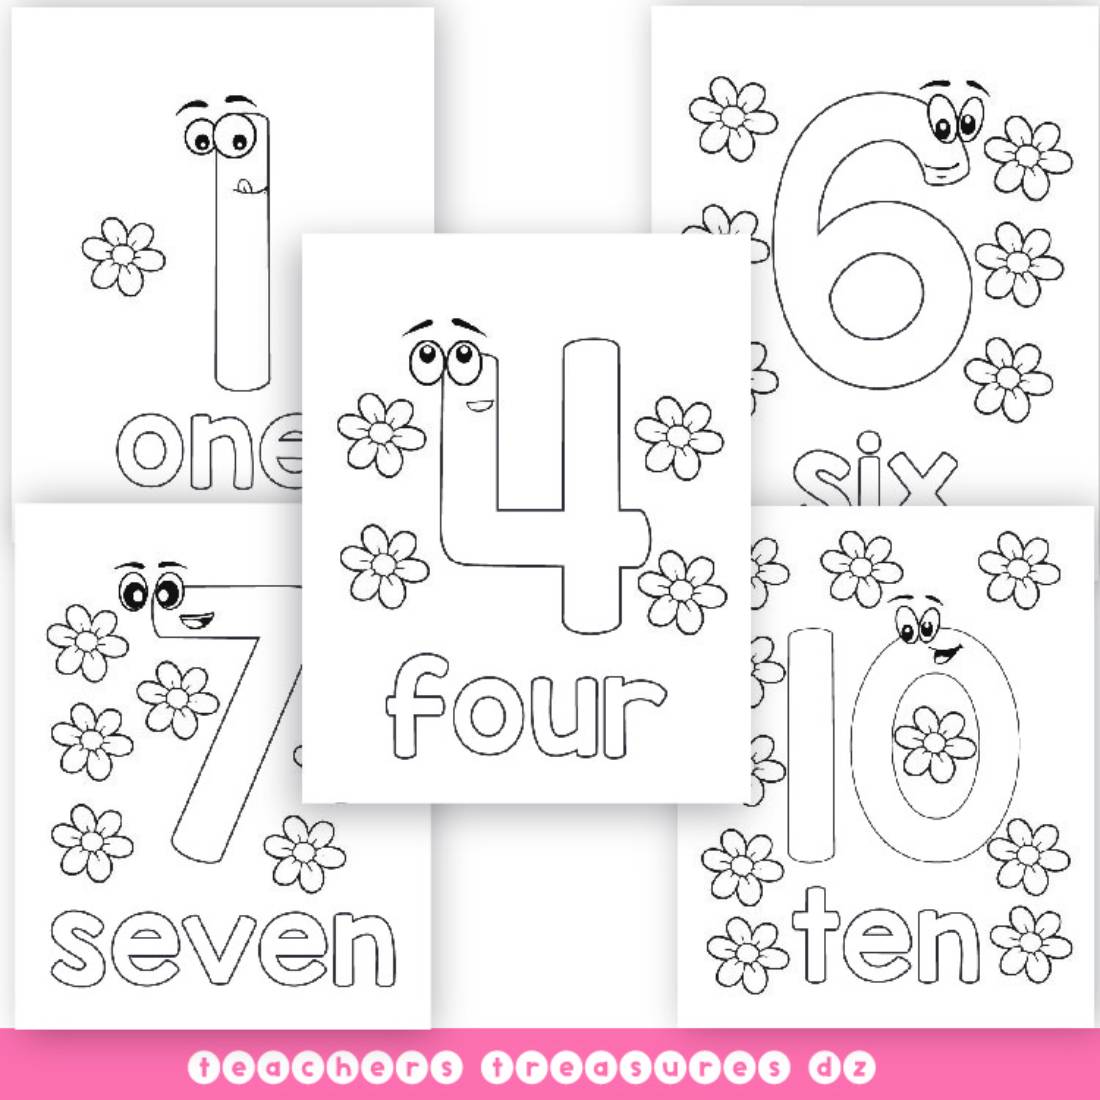 1 - 10 Numbers Printable Coloring Page preview image.